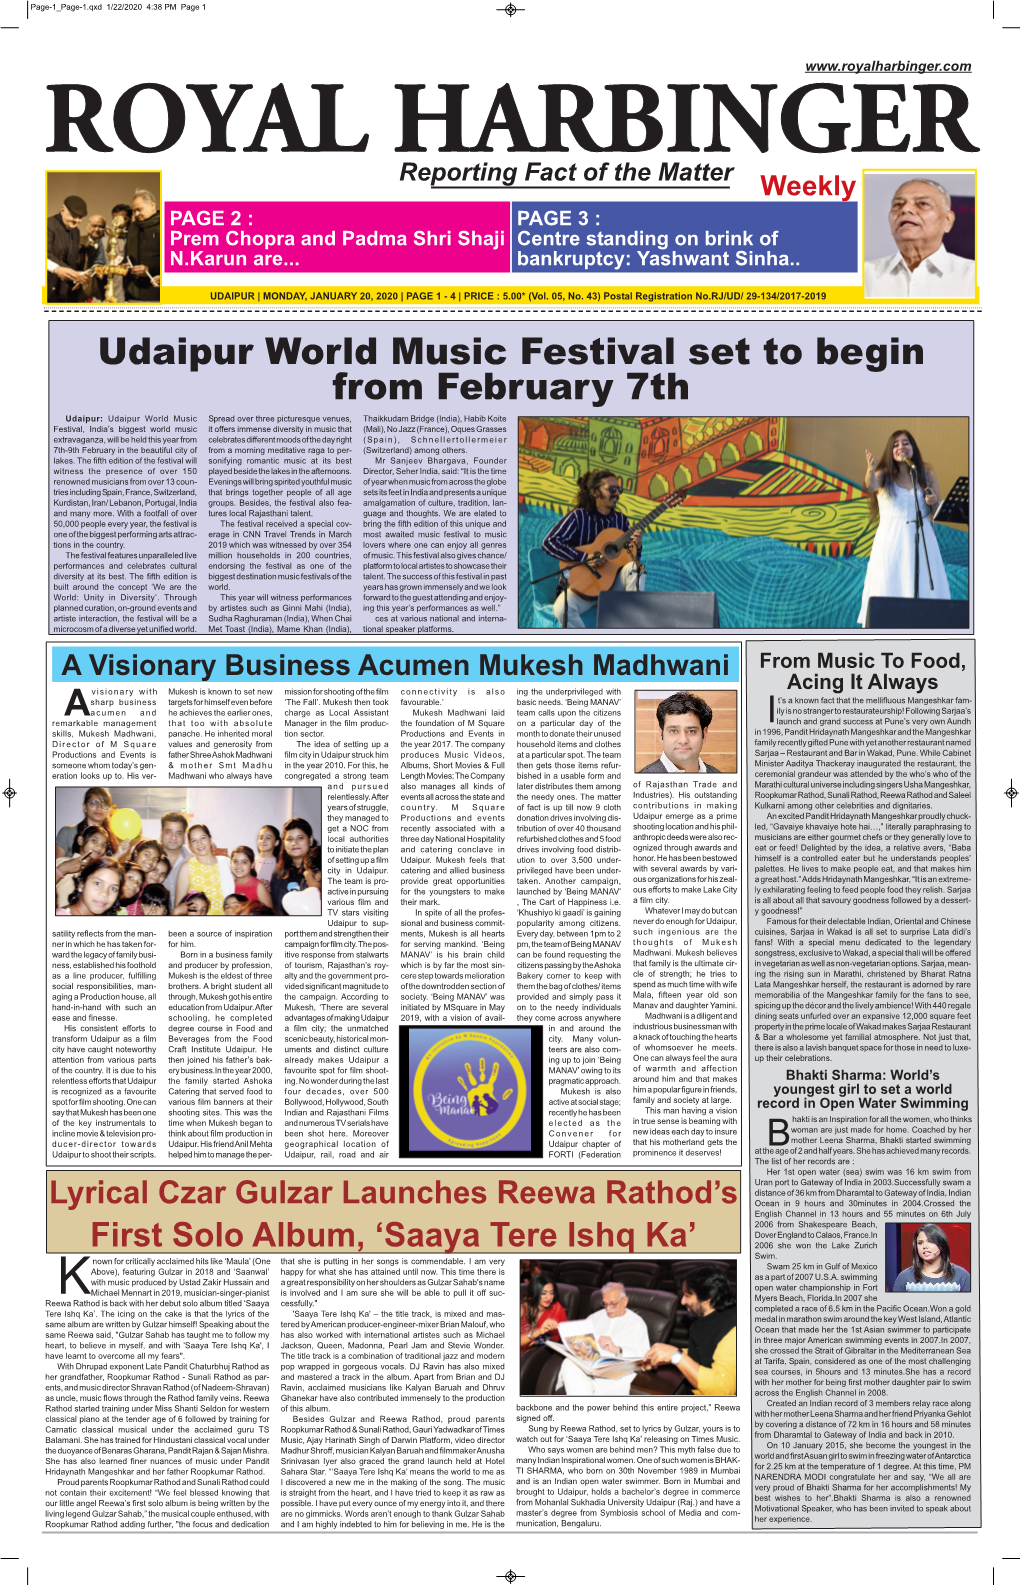 Udaipur World Music Festival Set to Begin from February